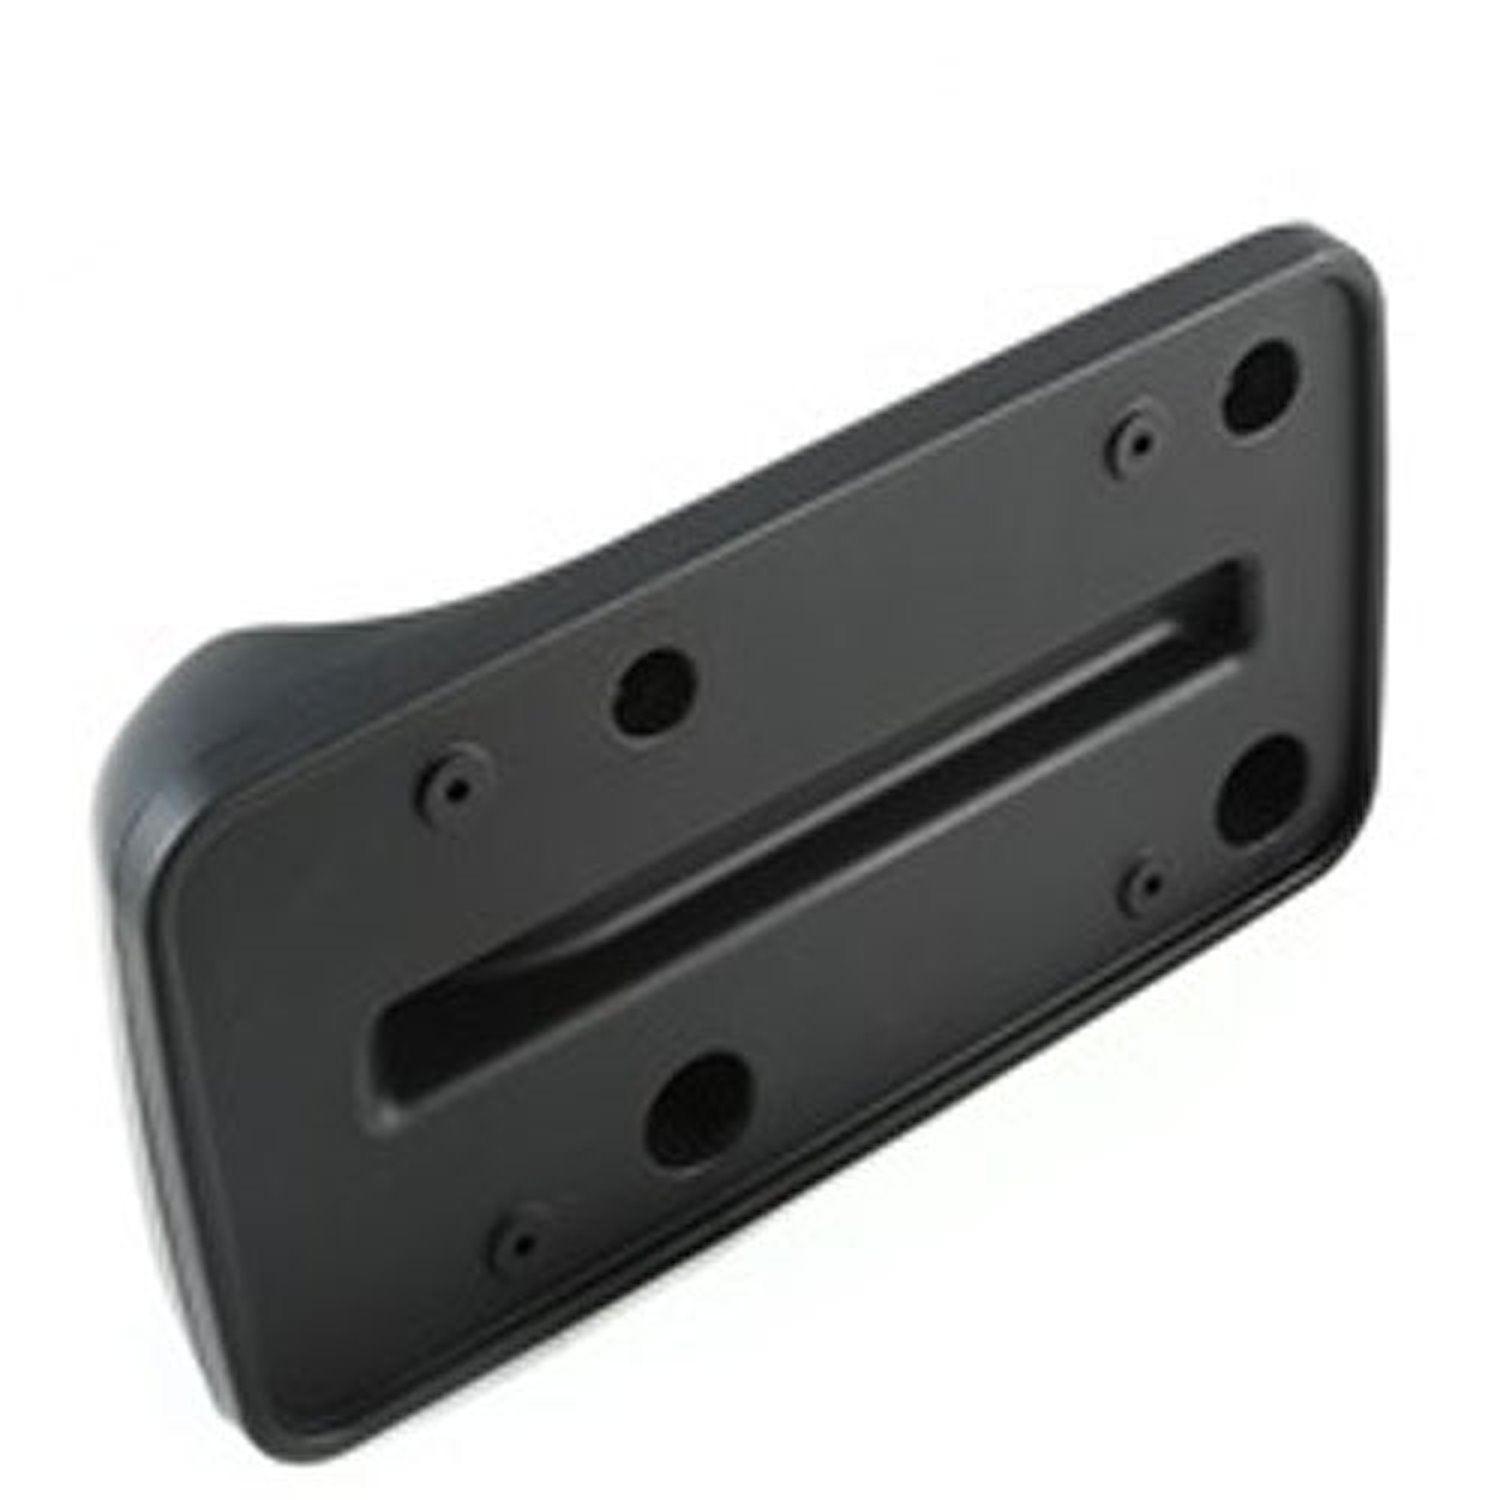 Replacement license plate bracket from Omix-ADA, Fits 97-06 Jeep Wrangler